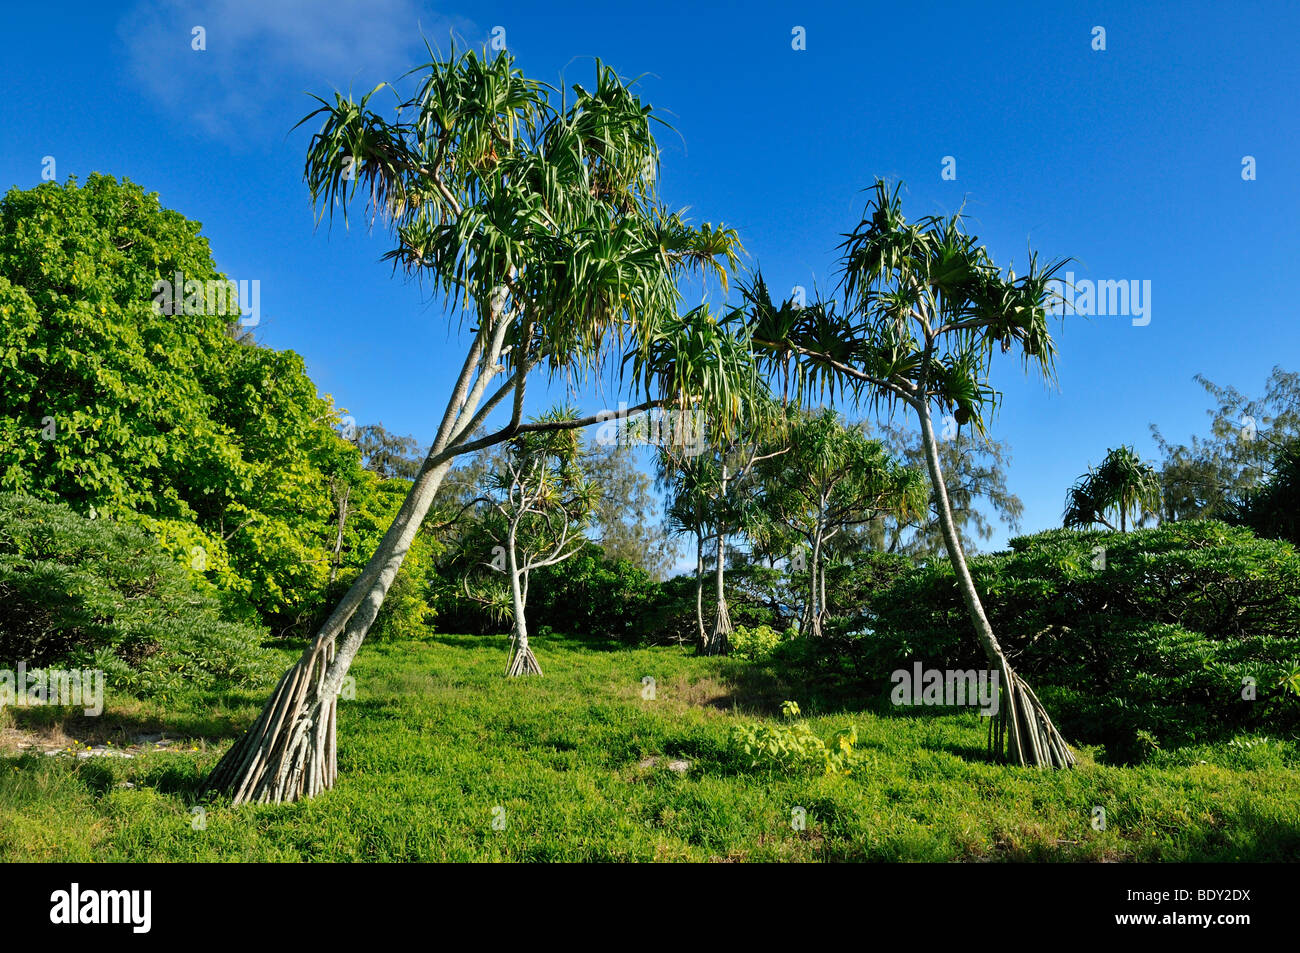 Pandanus and Pisonia trees on Heron Island, Capricornia Cays National Park, Great Barrier Reef, Queensland, Australia Stock Photo